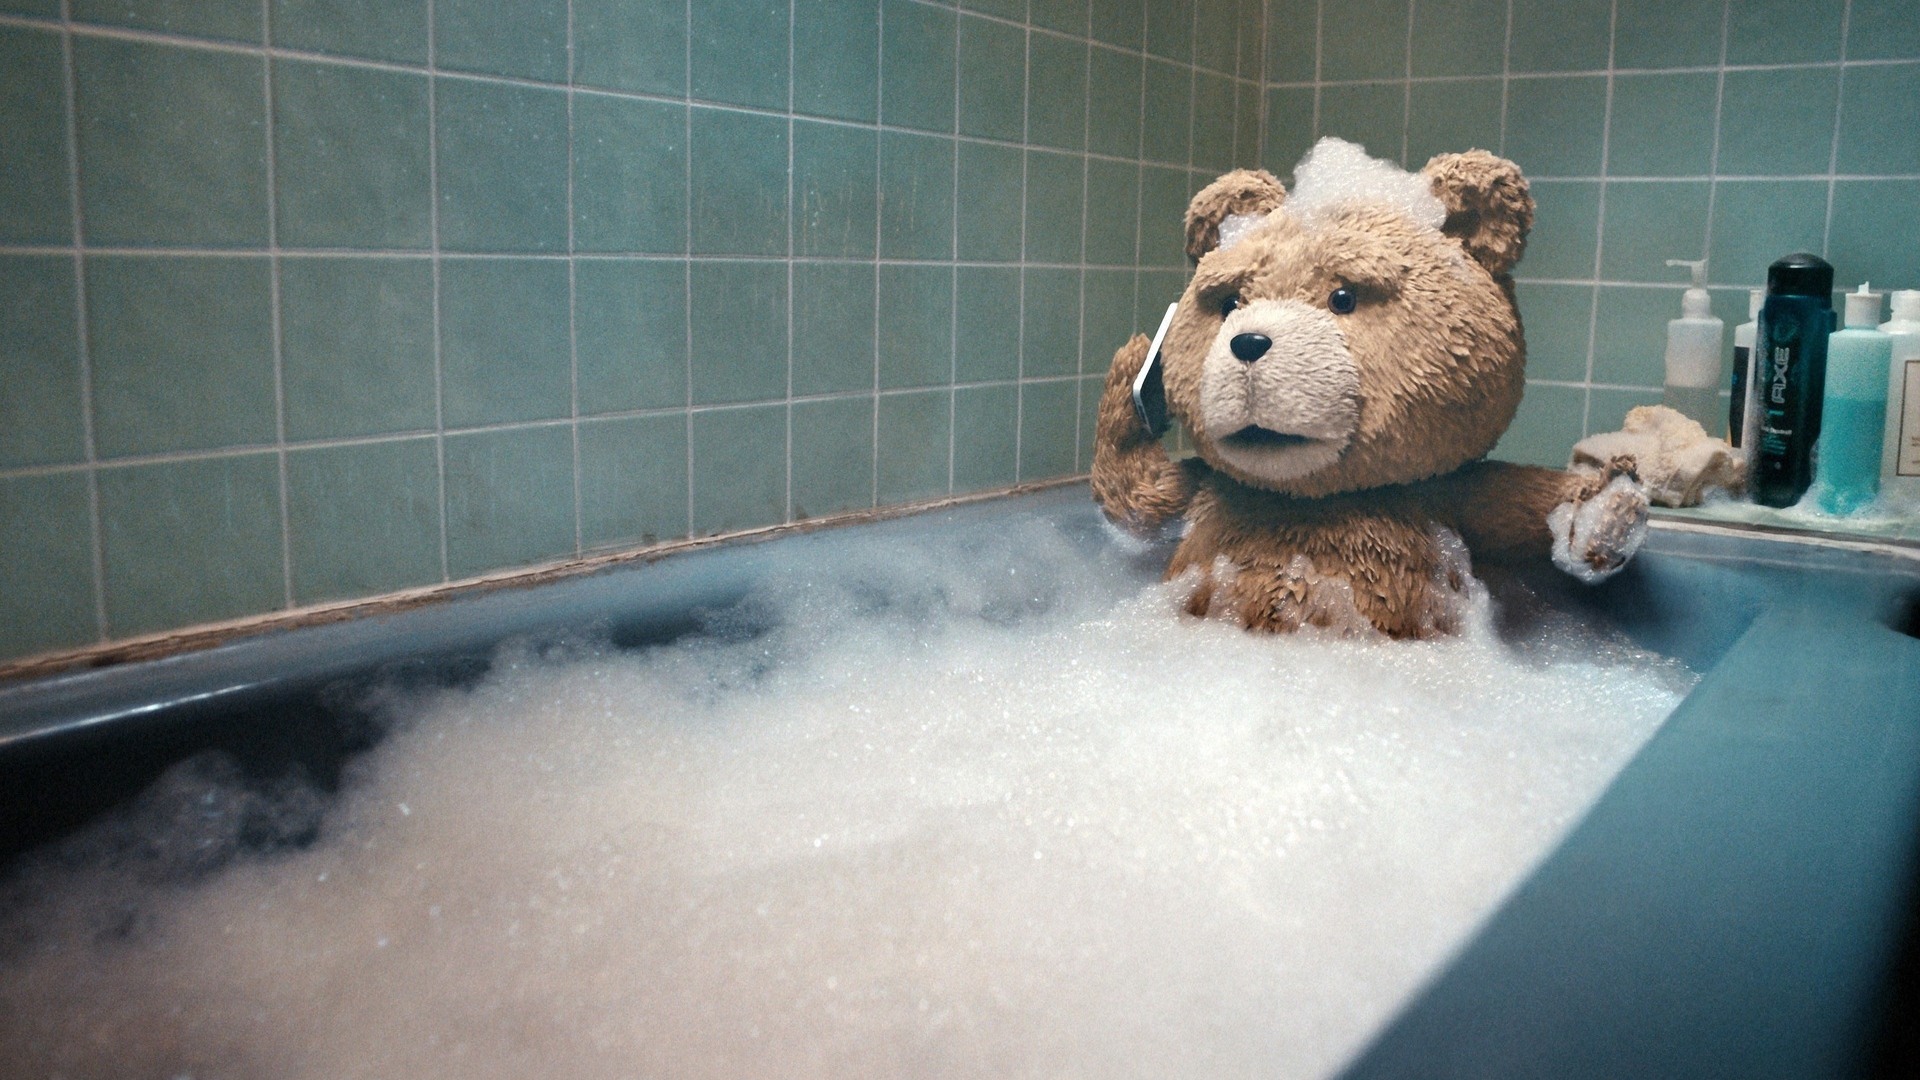 Ted 2012 HD movie wallpapers #2 - 1920x1080